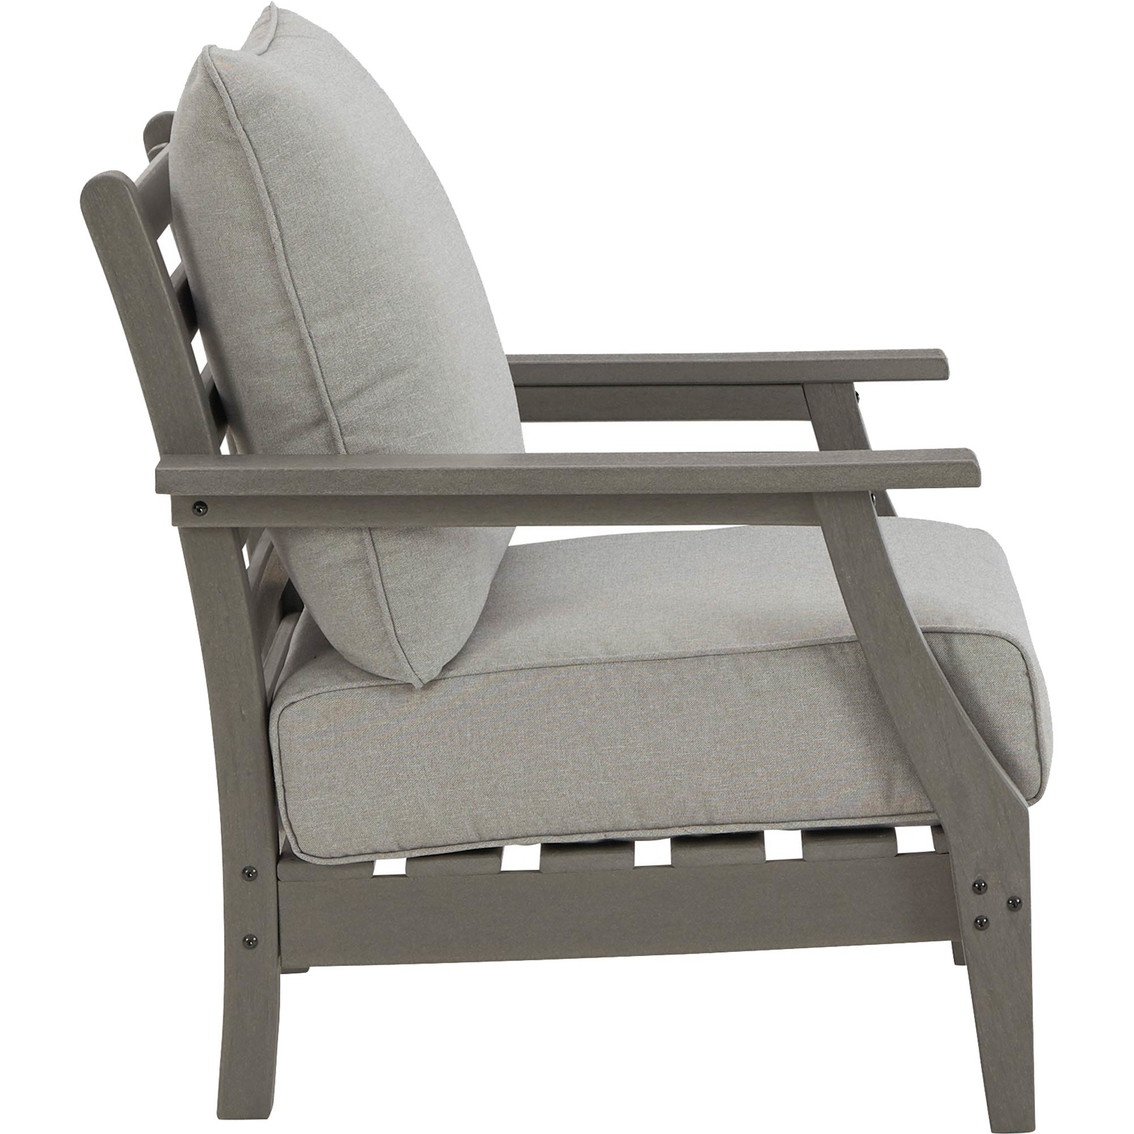 Signature Design by Ashley Visola Outdoor Lounge Chair 2 pk. - Image 5 of 6